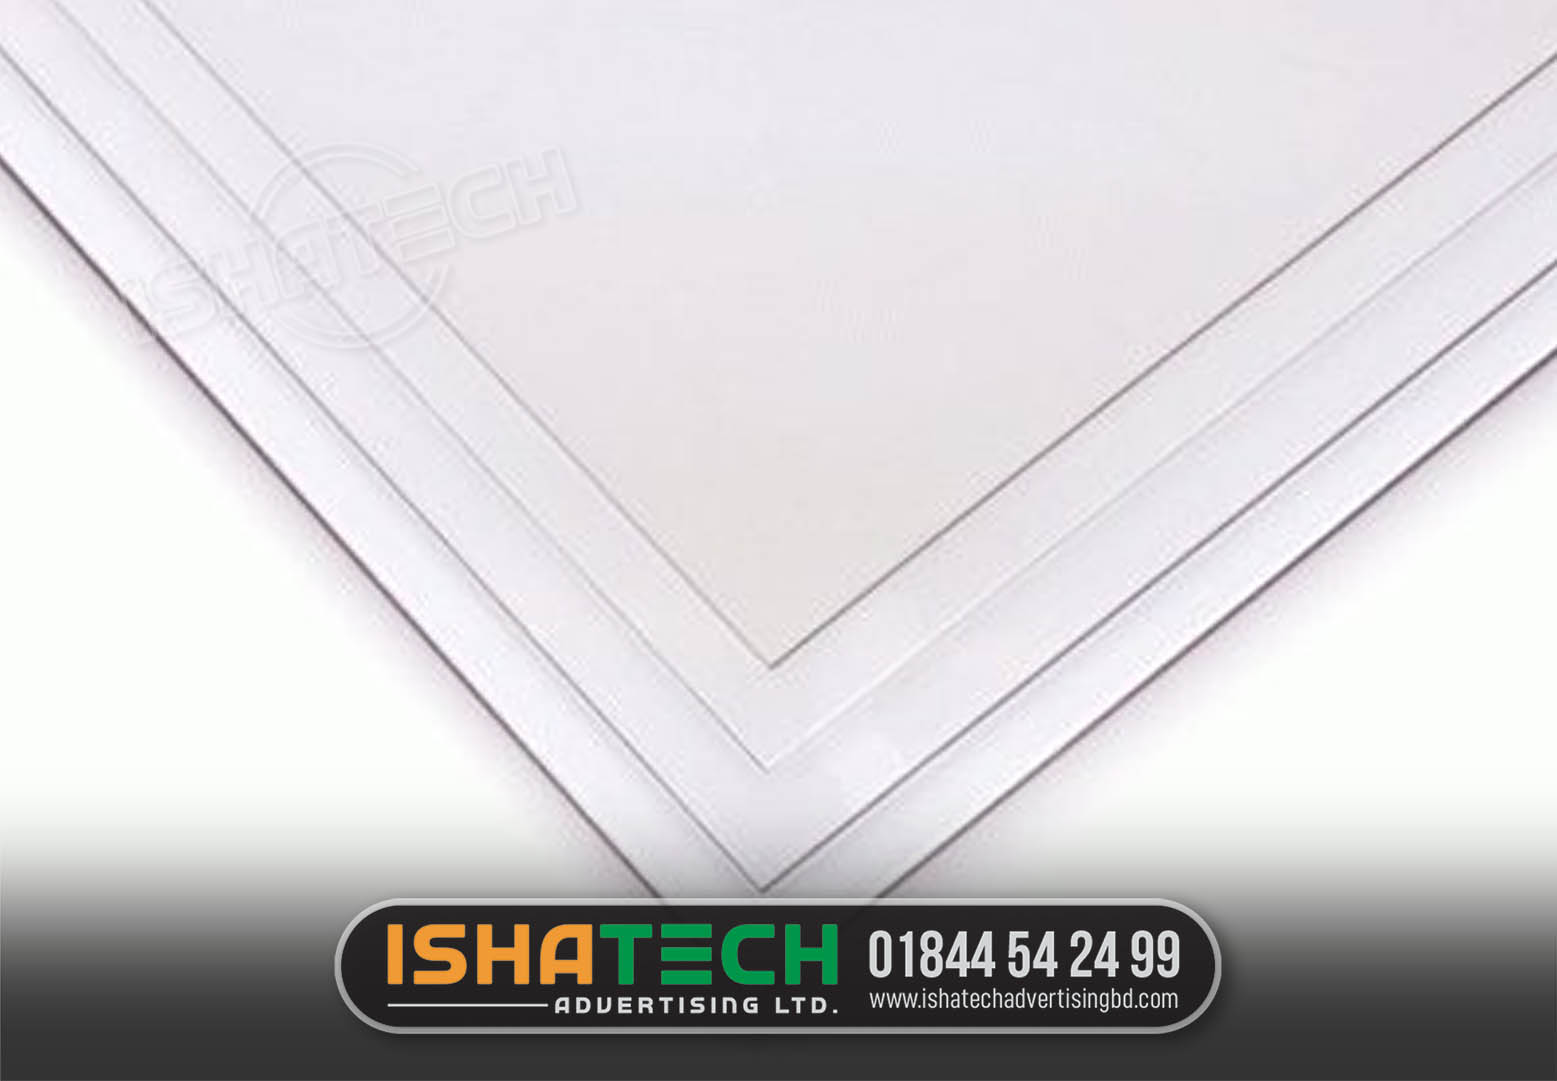 Exploring PVC Sheet Prices in Bangladesh, PVC Sheet Price in Bangladesh. 4×8 pvc sheet price in Bangladesh. 4mm pvc sheet price in Bangladesh. 12mm pvc sheet price in Bangladesh. Rfl pvc sheet price in Bangladesh. 2mm pvc sheet price in Bangladesh. upvc sheet price in Bangladesh. 18mm pvc board price in Bangladesh. Find the PVC Sheet Price in Bangladesh. RFL is the Largest Manufacturer of UPVC sheets in BD. Visit us to find the glossy, laser cutting, colored, soft, white & PVC sheet at cheap prices. 3mm PVC Board White for Craft and DIY Project 3 pcs. 3mm PVC Board 5pcs White/blue/yellow for Craft. 5mm PVC Board 5pcs White for Craft and DIY Project. PVC Board 8mm white colour for DIY project model.